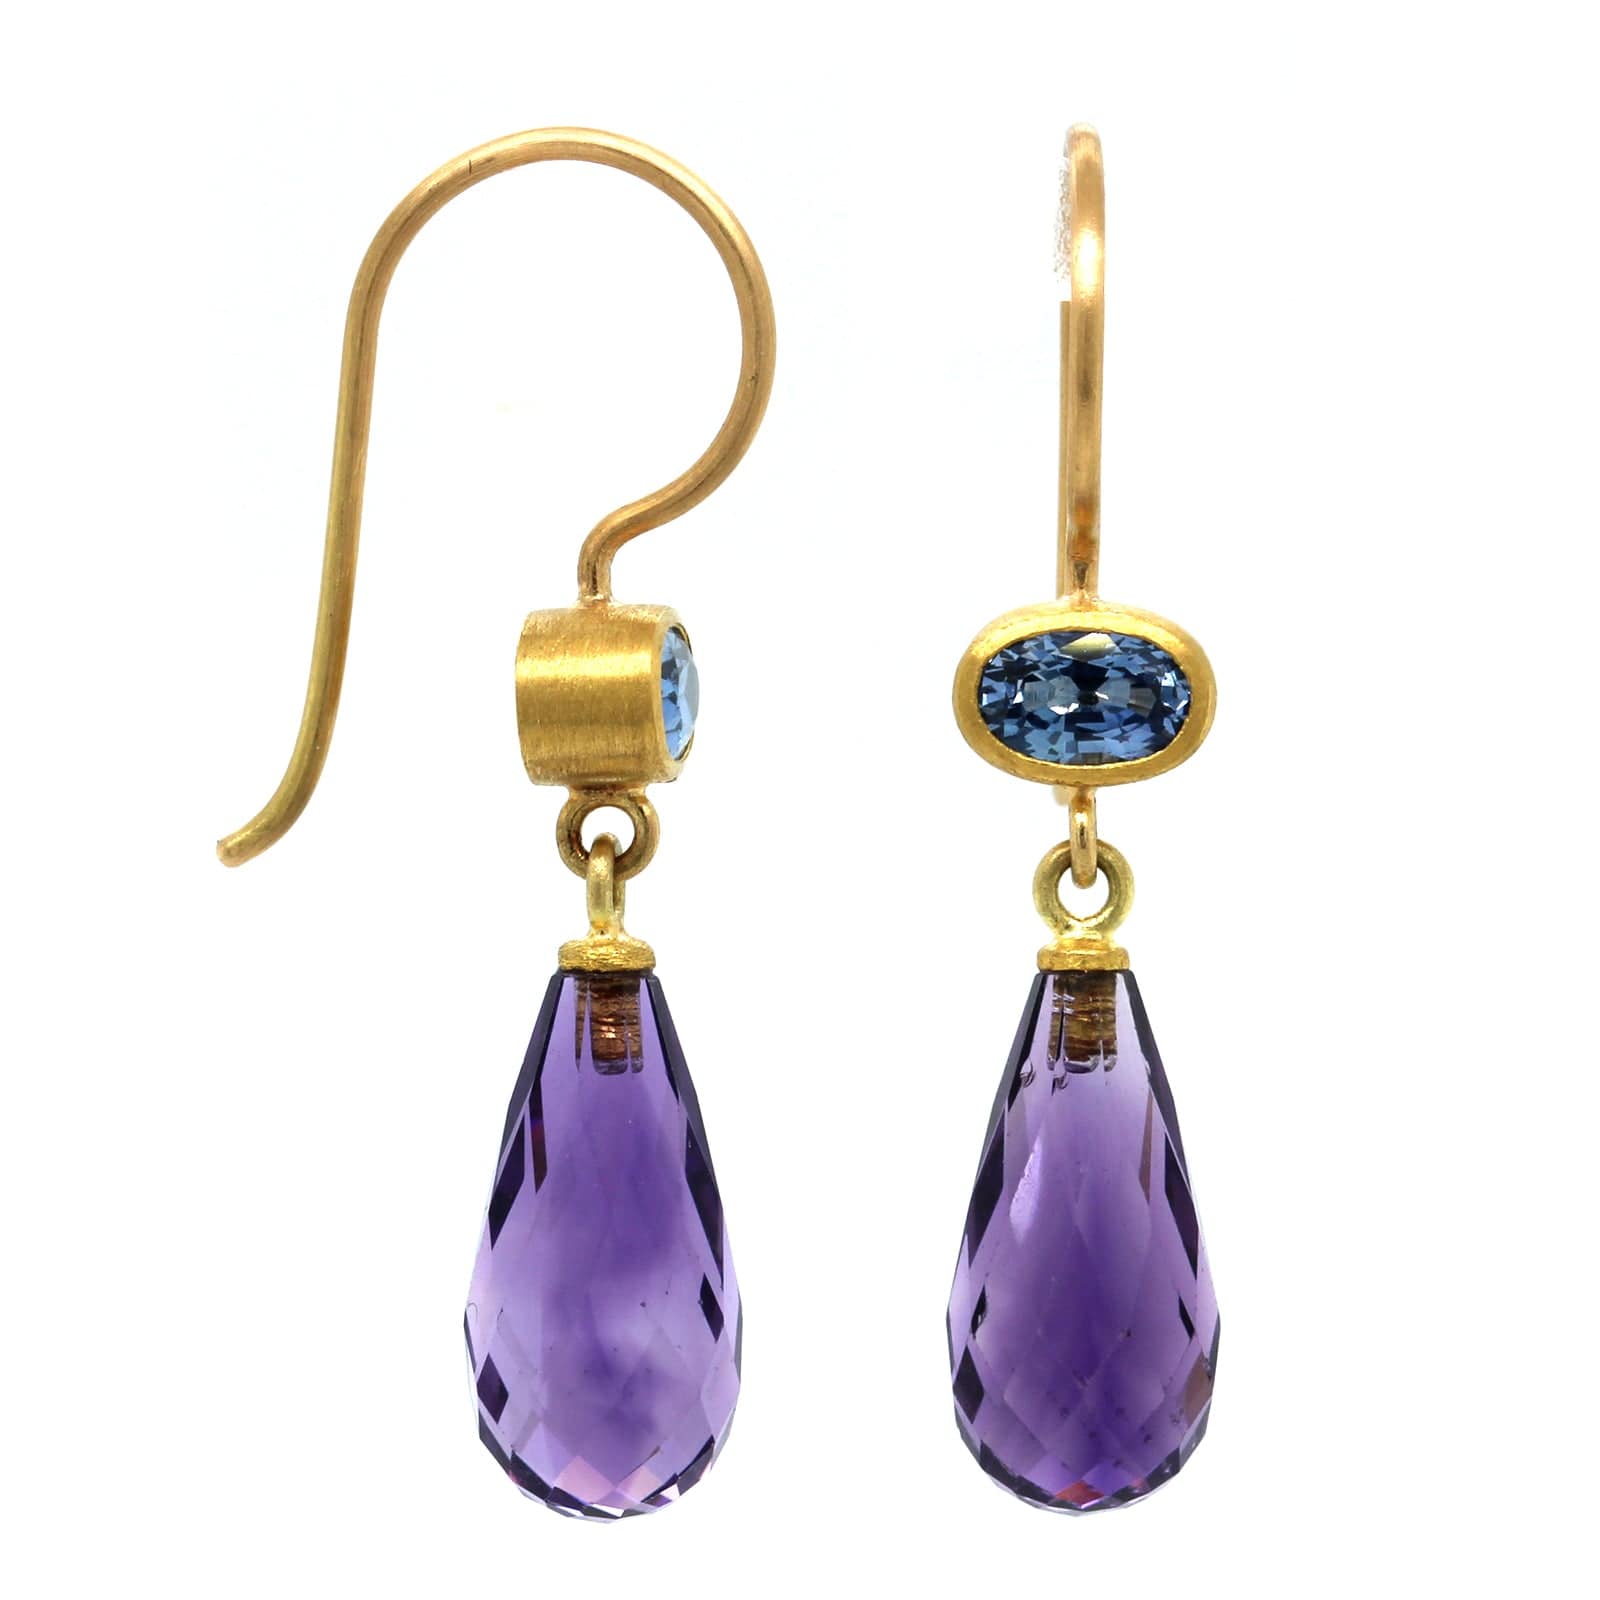 Mallary Marks 22K and 18K Yellow Gold Amethyst and Sapphire Drop Earrings